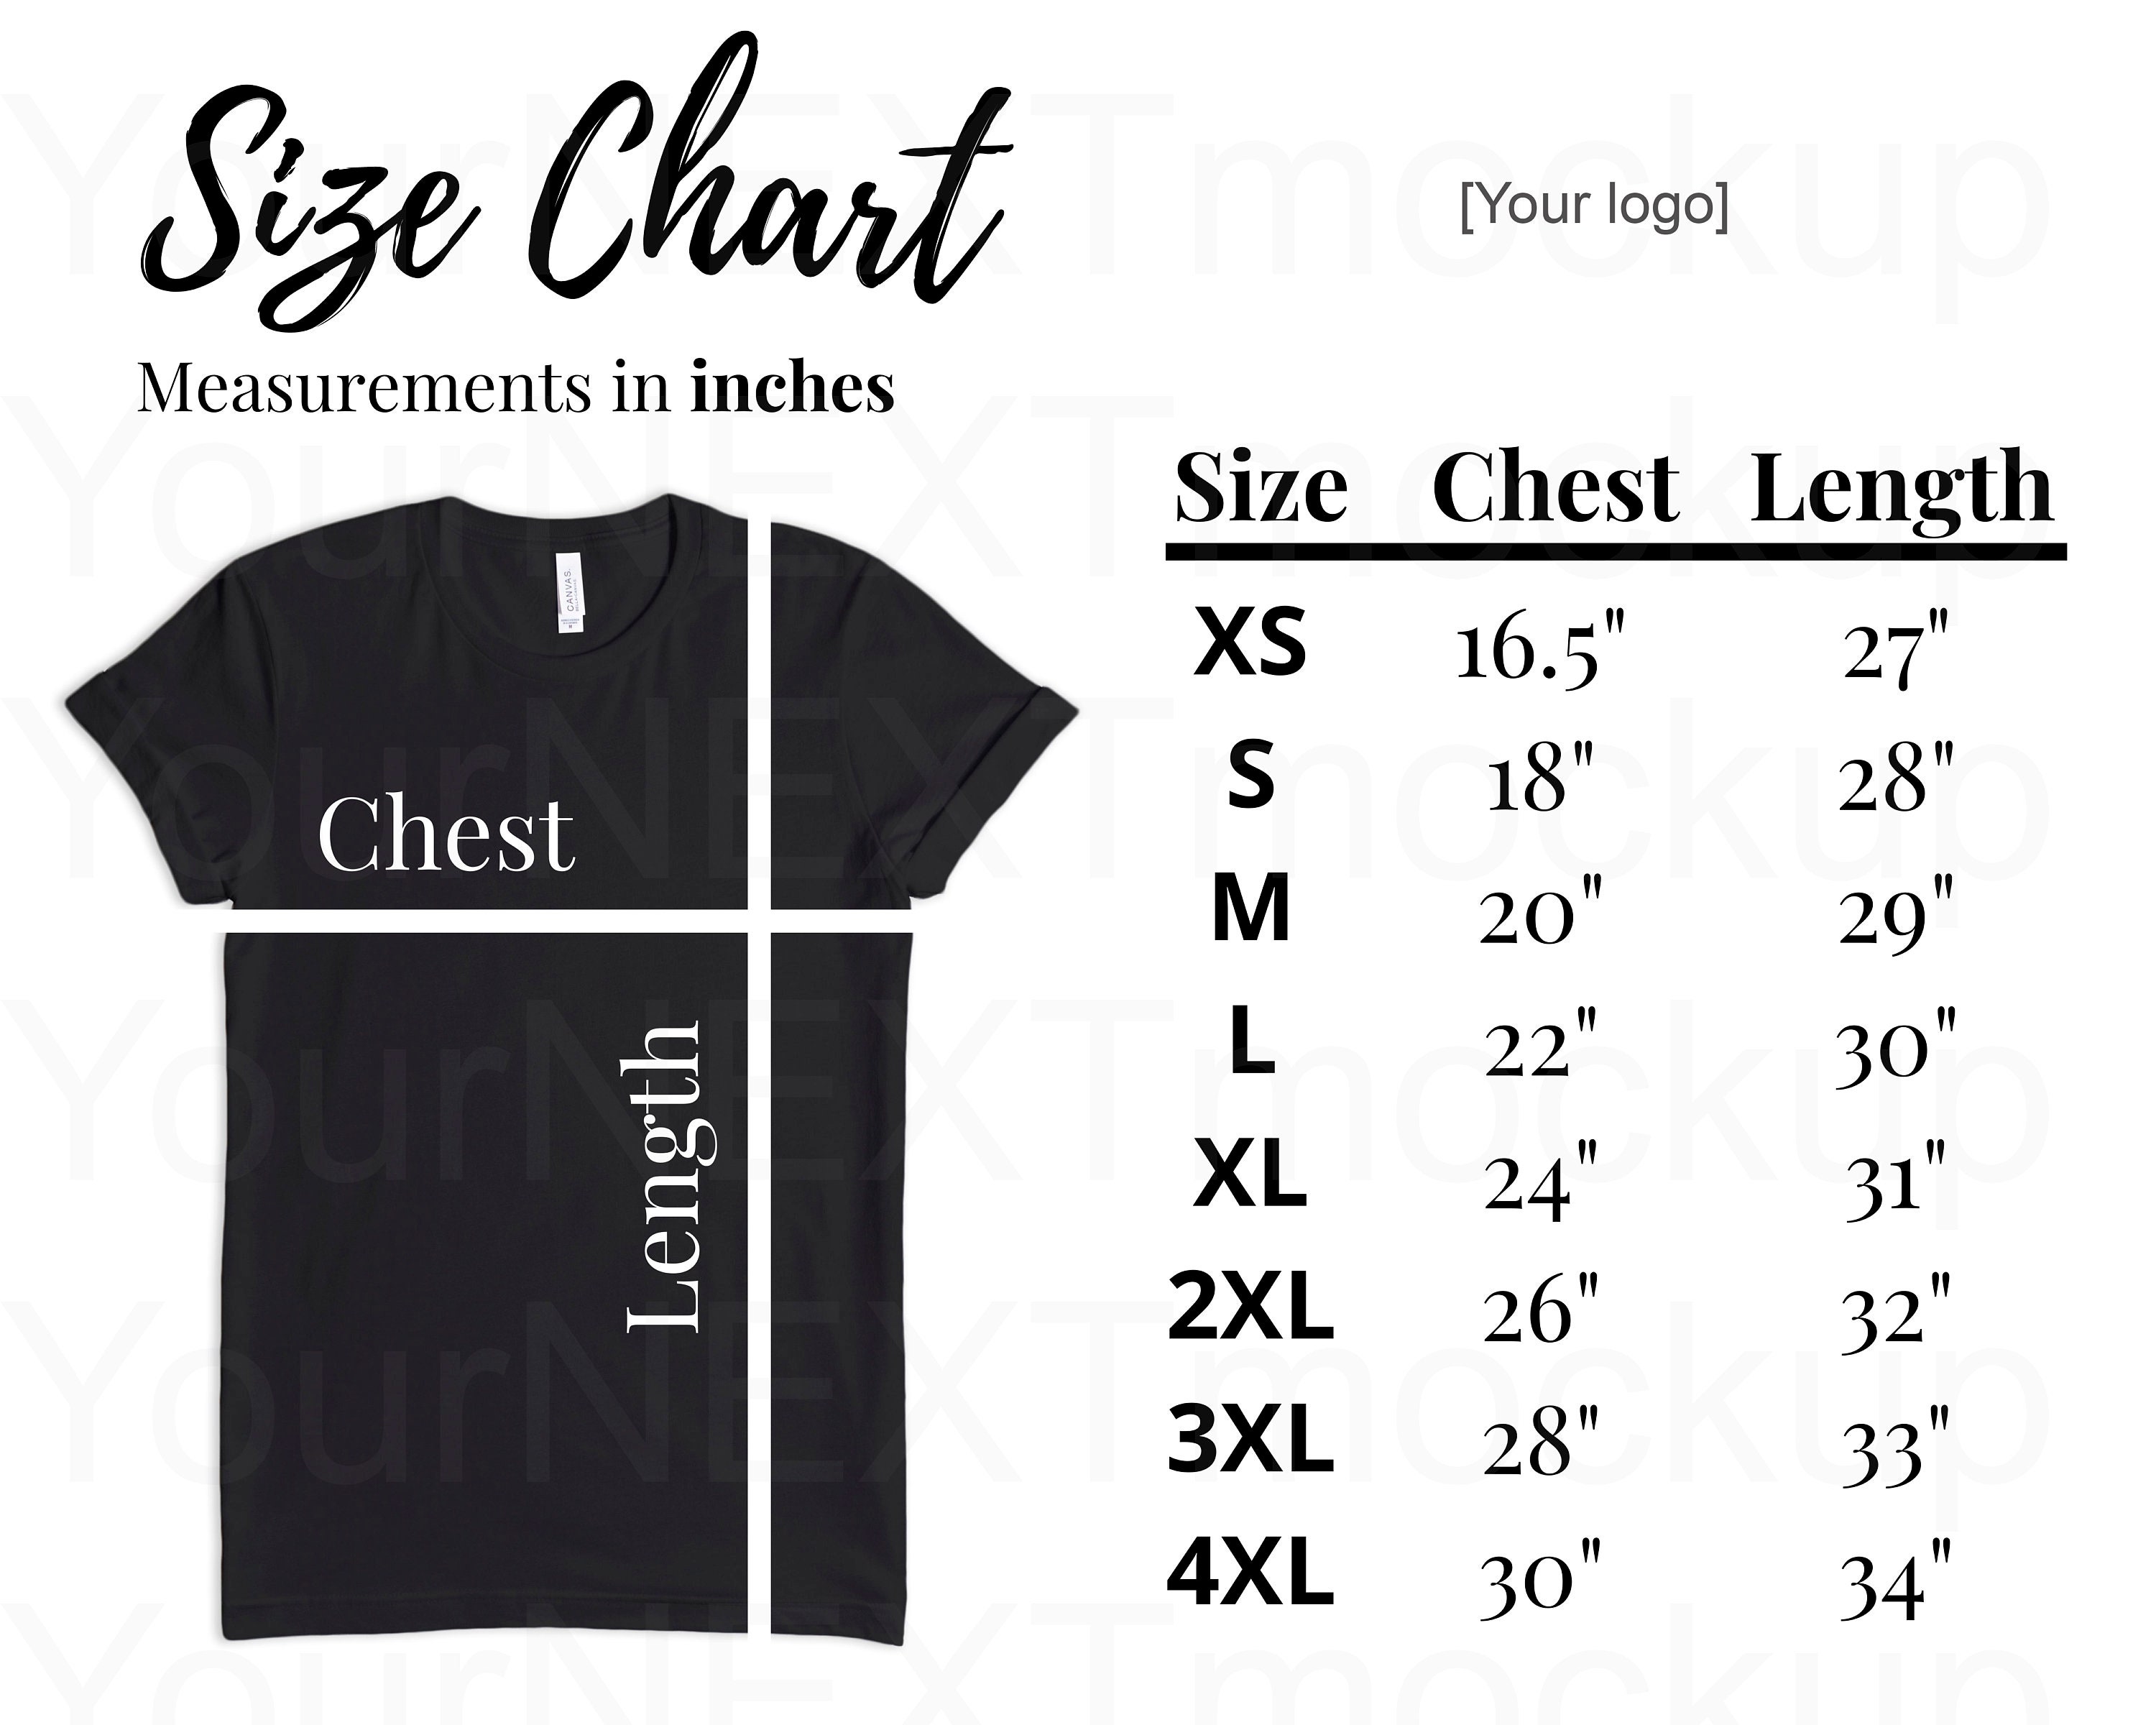 Bella Canvas 3001 Size Chart Inches Imperial System Unisex - Etsy Singapore